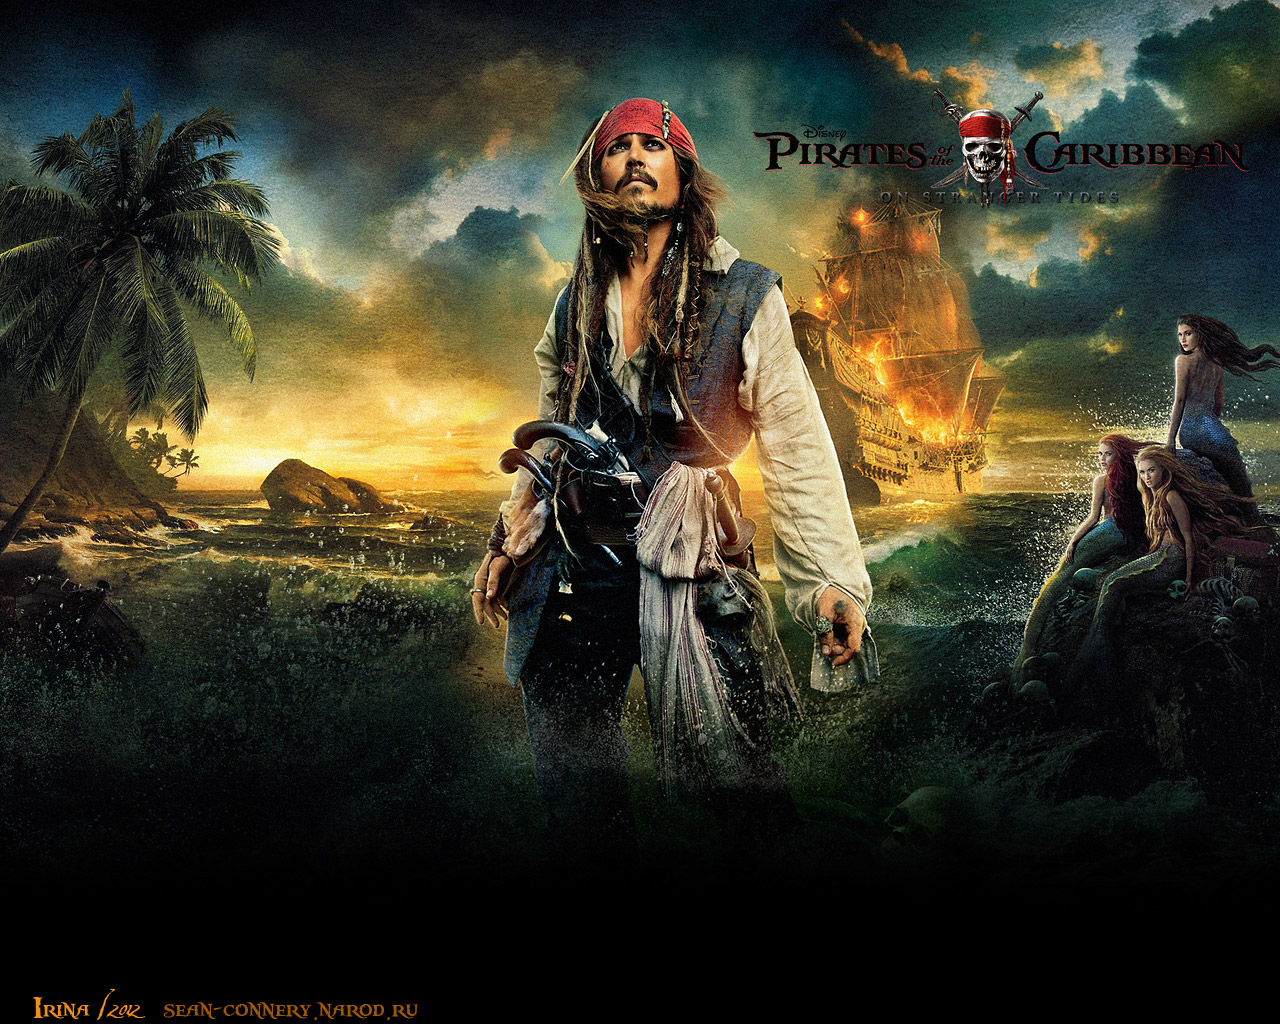 POTC wallpapers Pirates of the Caribbean Wallpaper 32949178